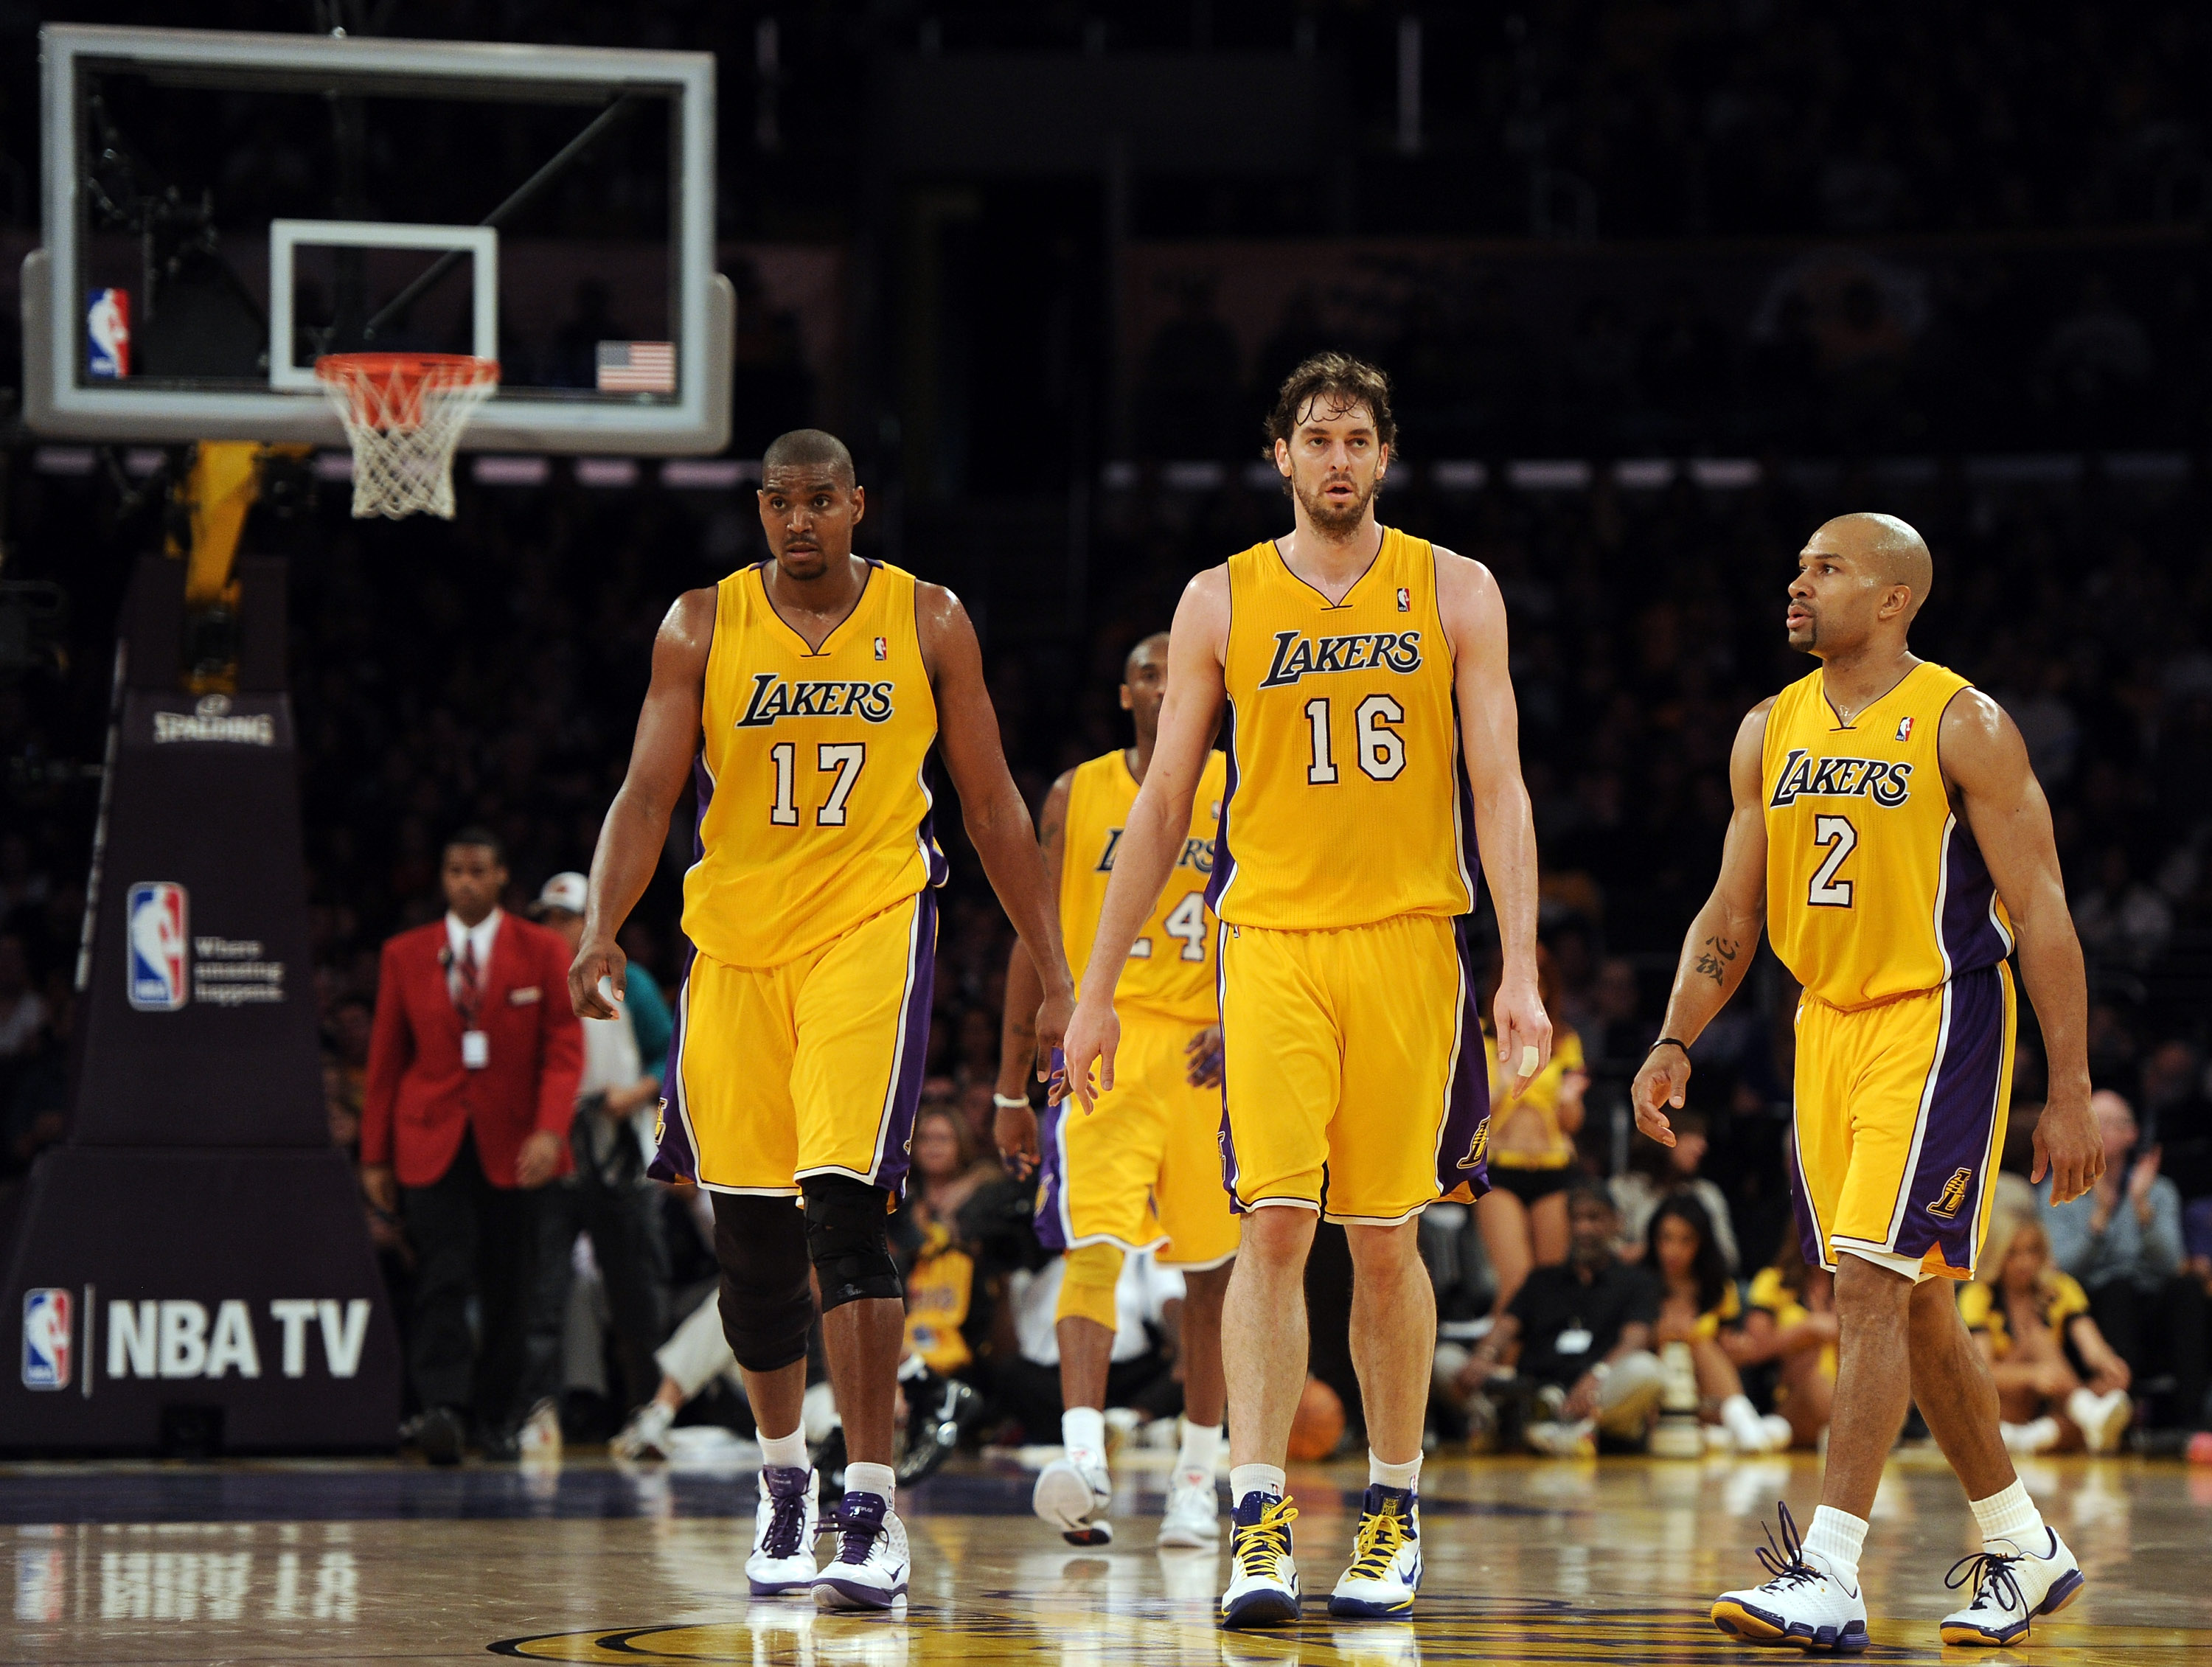 LOS ANGELES, CA - FEBRUARY 03: Pau Gasol #16, Derek Fisher #2 and Andrew Bynum #17 of the Los Angeles Lakers leave the court for a timeout trailing the San Antonio Spurs at Staples Center on February 3, 2011 in Los Angeles, California.  NOTE TO USER: User